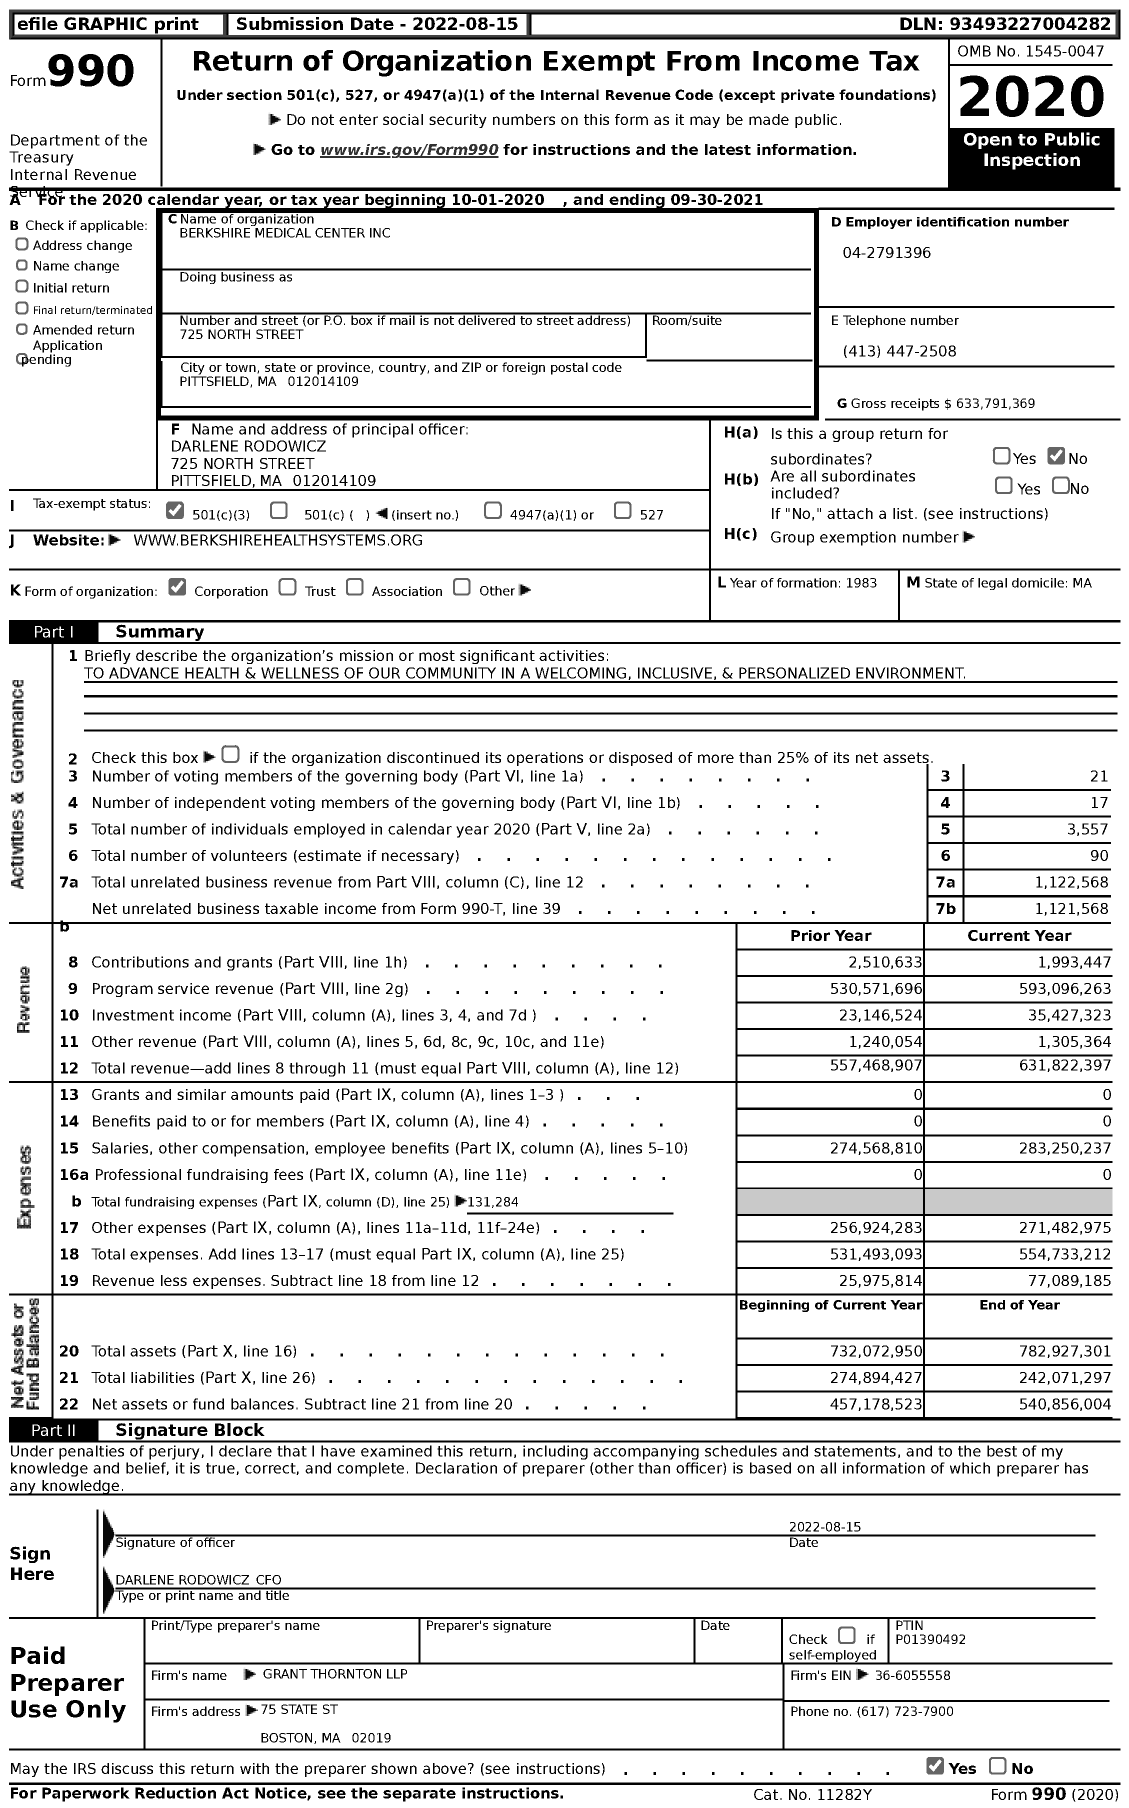 Image of first page of 2020 Form 990 for Berkshire Medical Center (BMC)